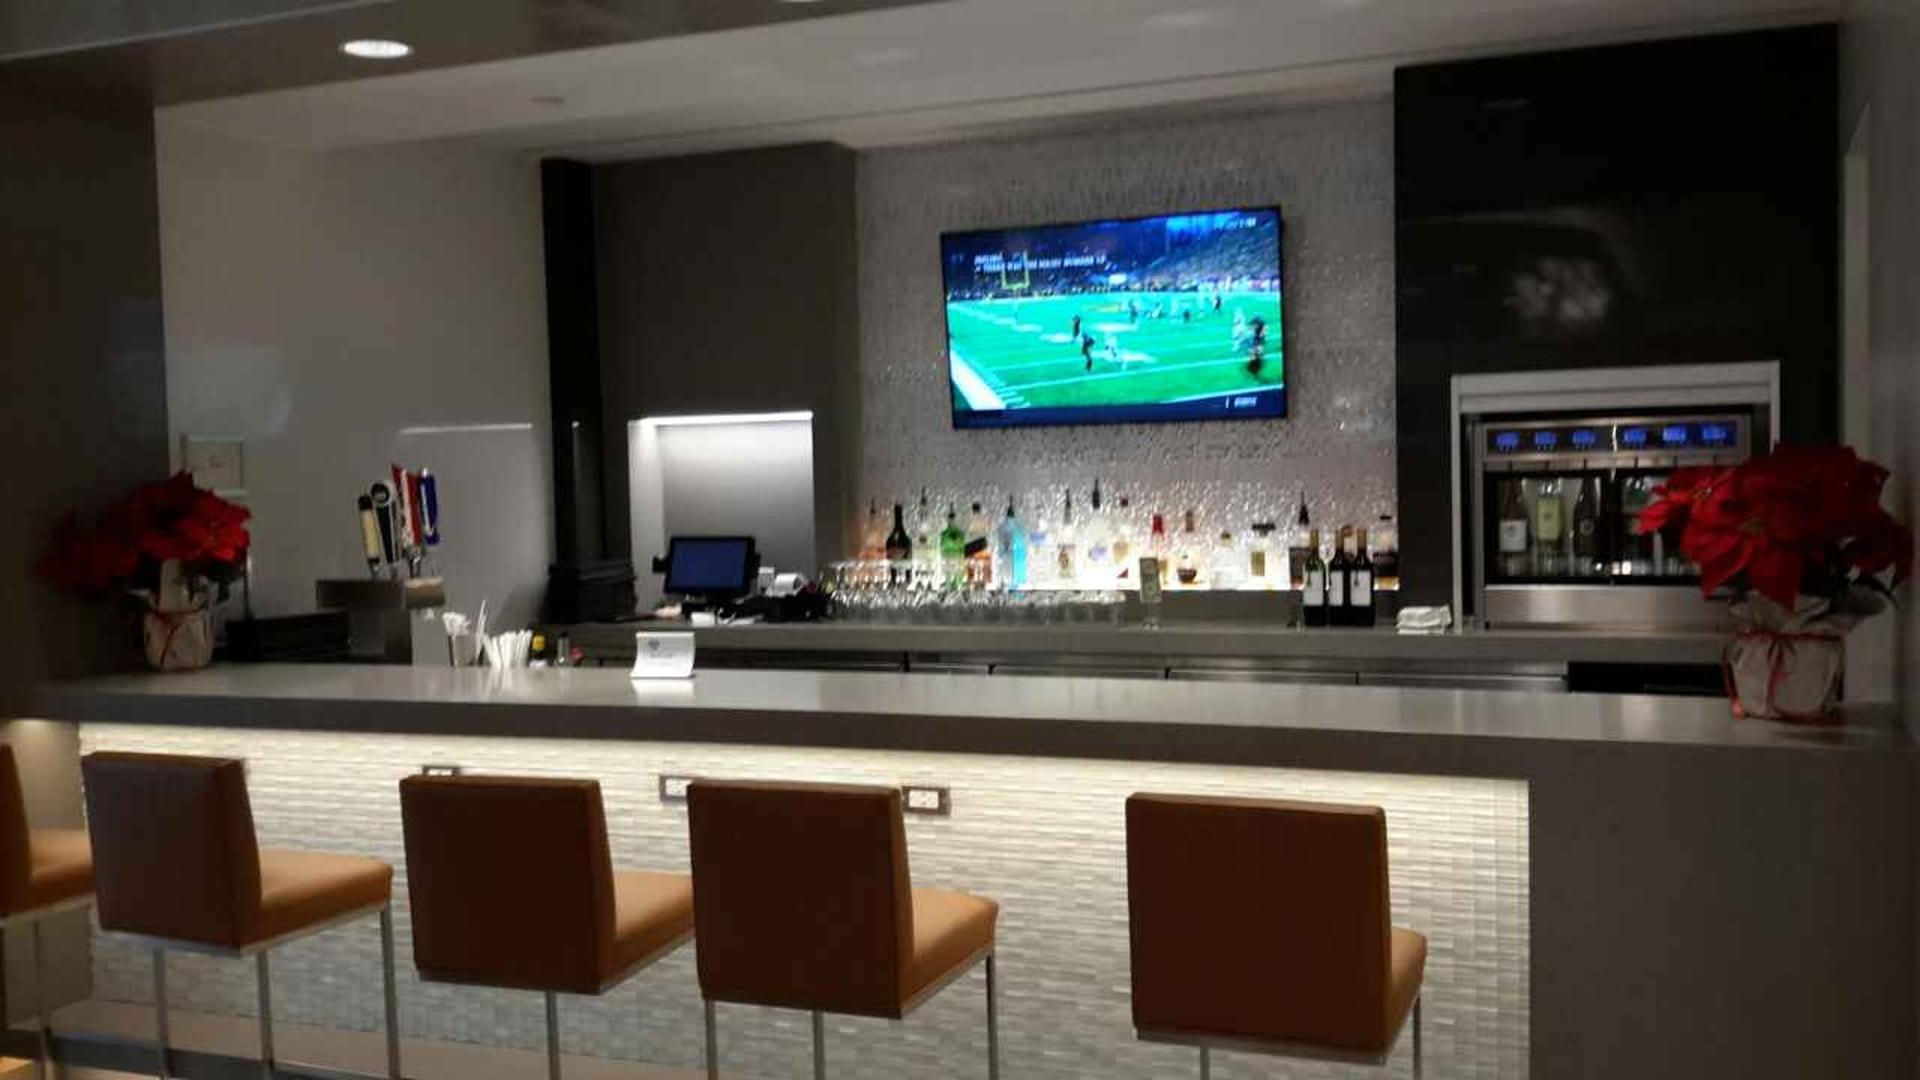 American Airlines Admirals Club image 8 of 9